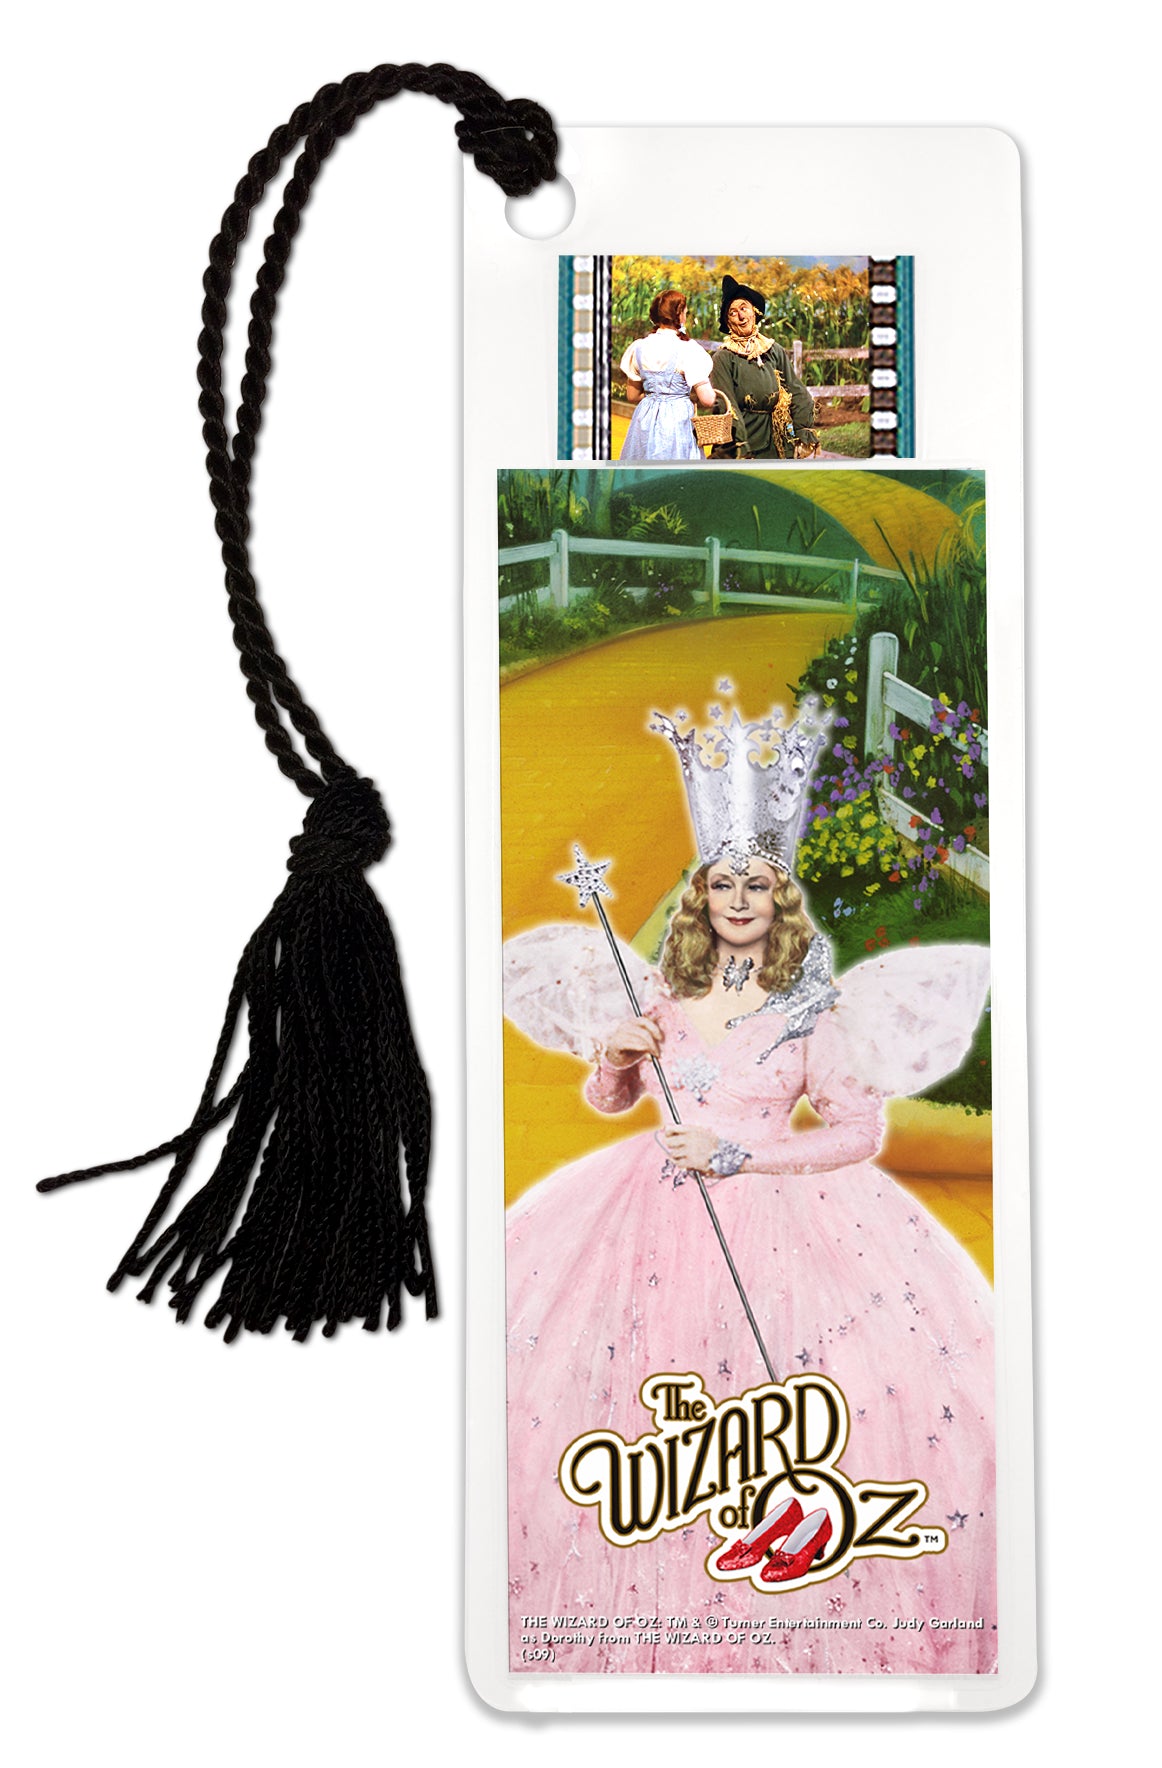 The Wizard of Oz (Glinda the Good Witch) FilmCells™ Bookmark USBM534